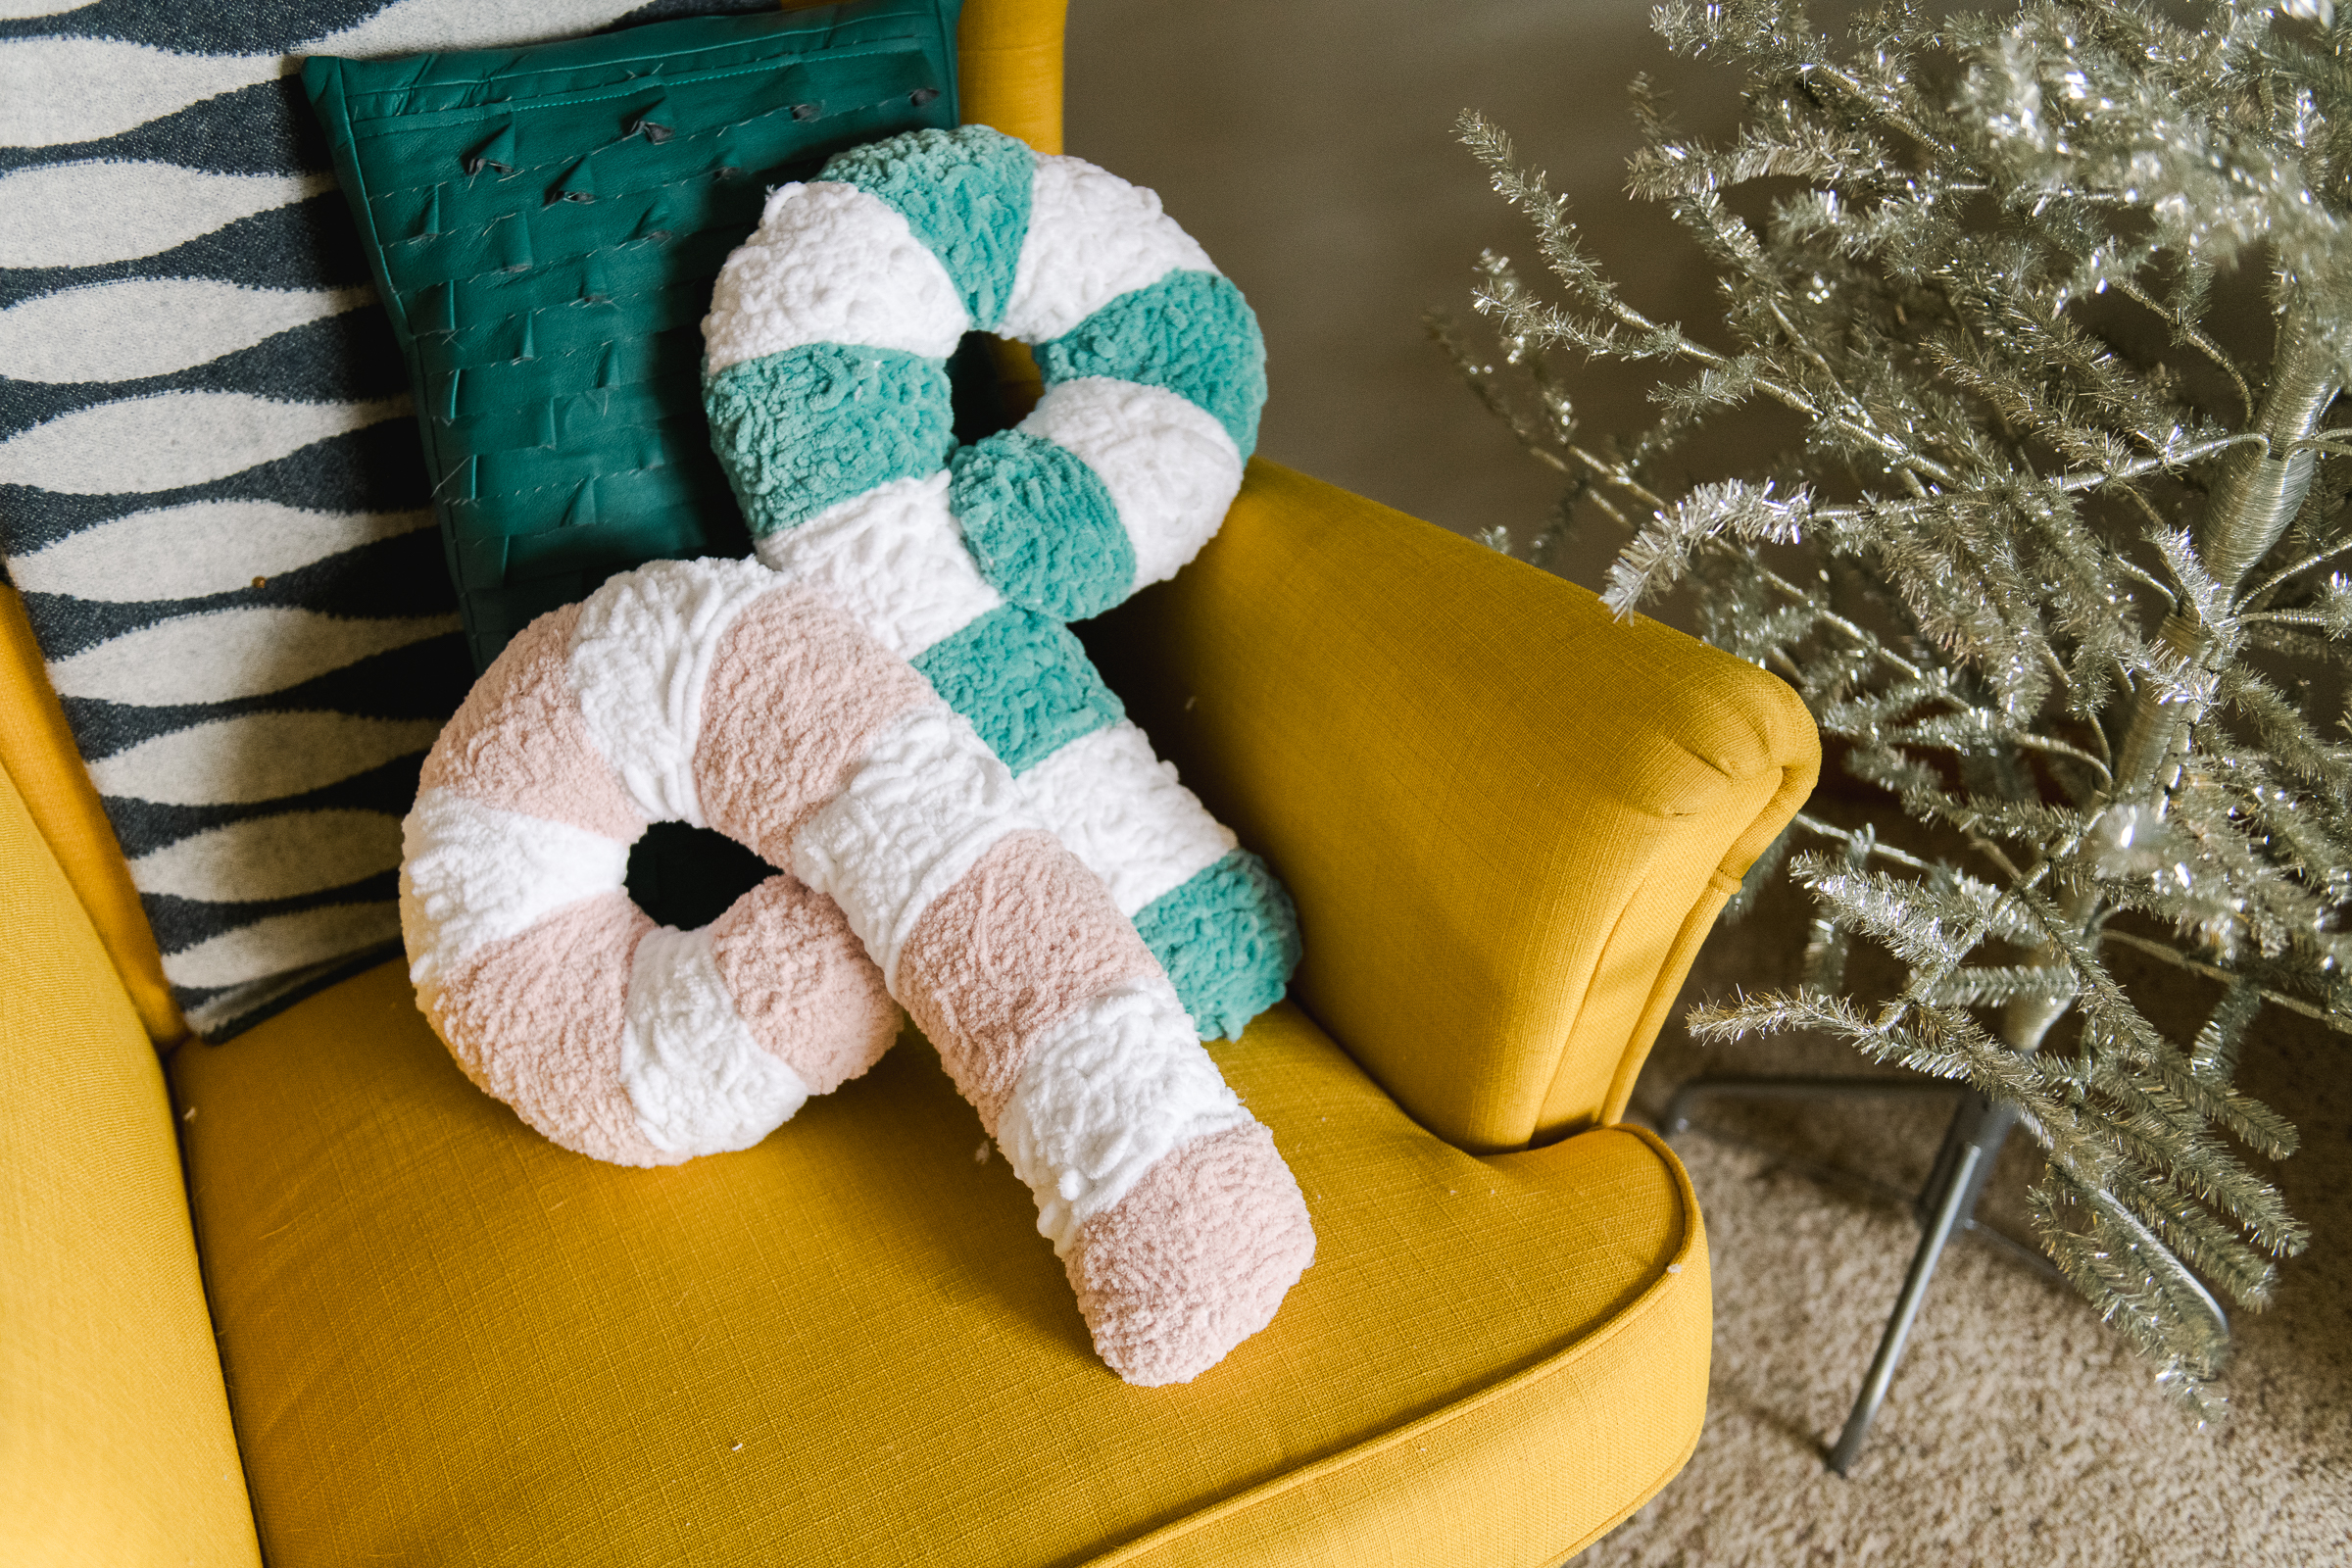 https://www.janome.com/siteassets/inspire/projects/holiday/candy-cane-pillow-using-the-couching-foot/janome-couching-foot-candy-cane-pillows-81.jpg